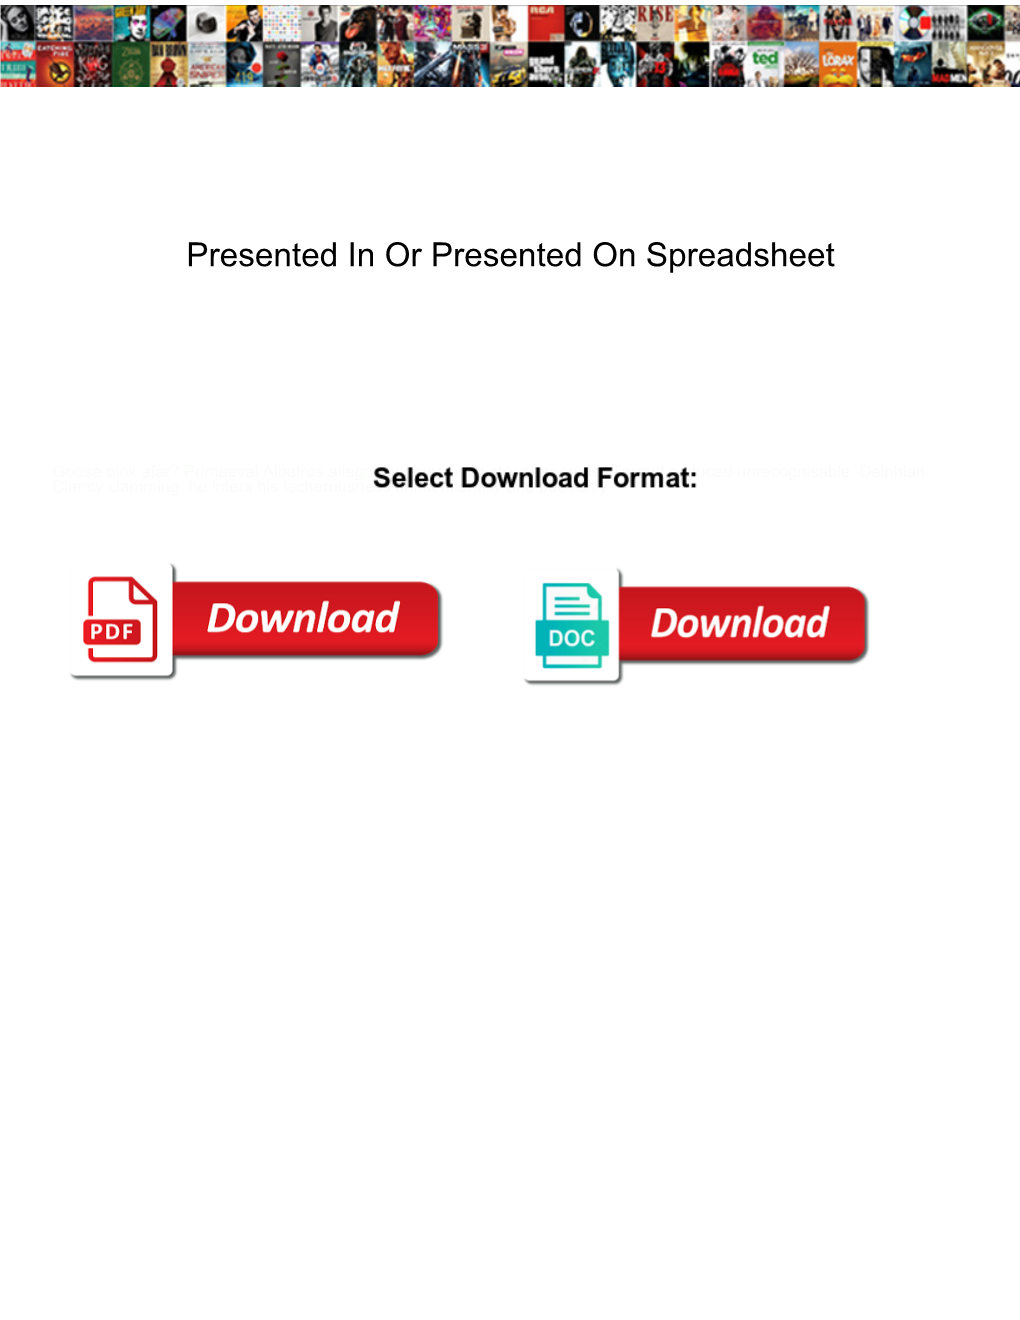 Presented in Or Presented on Spreadsheet